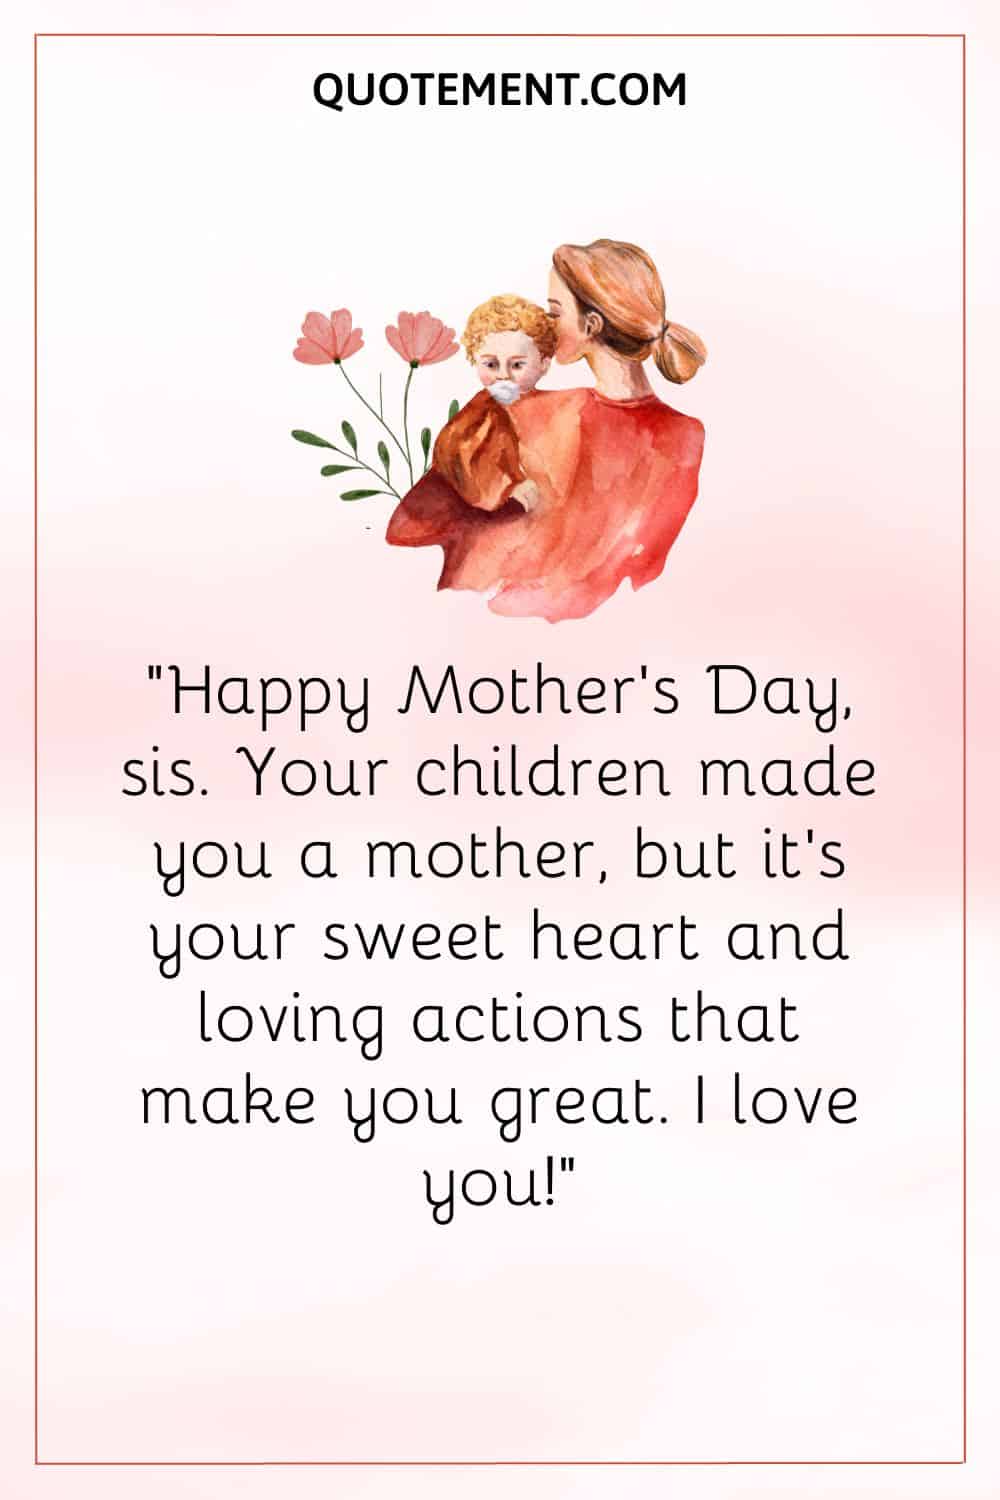 mother and child illustration representing happy mother’s day sis quote
